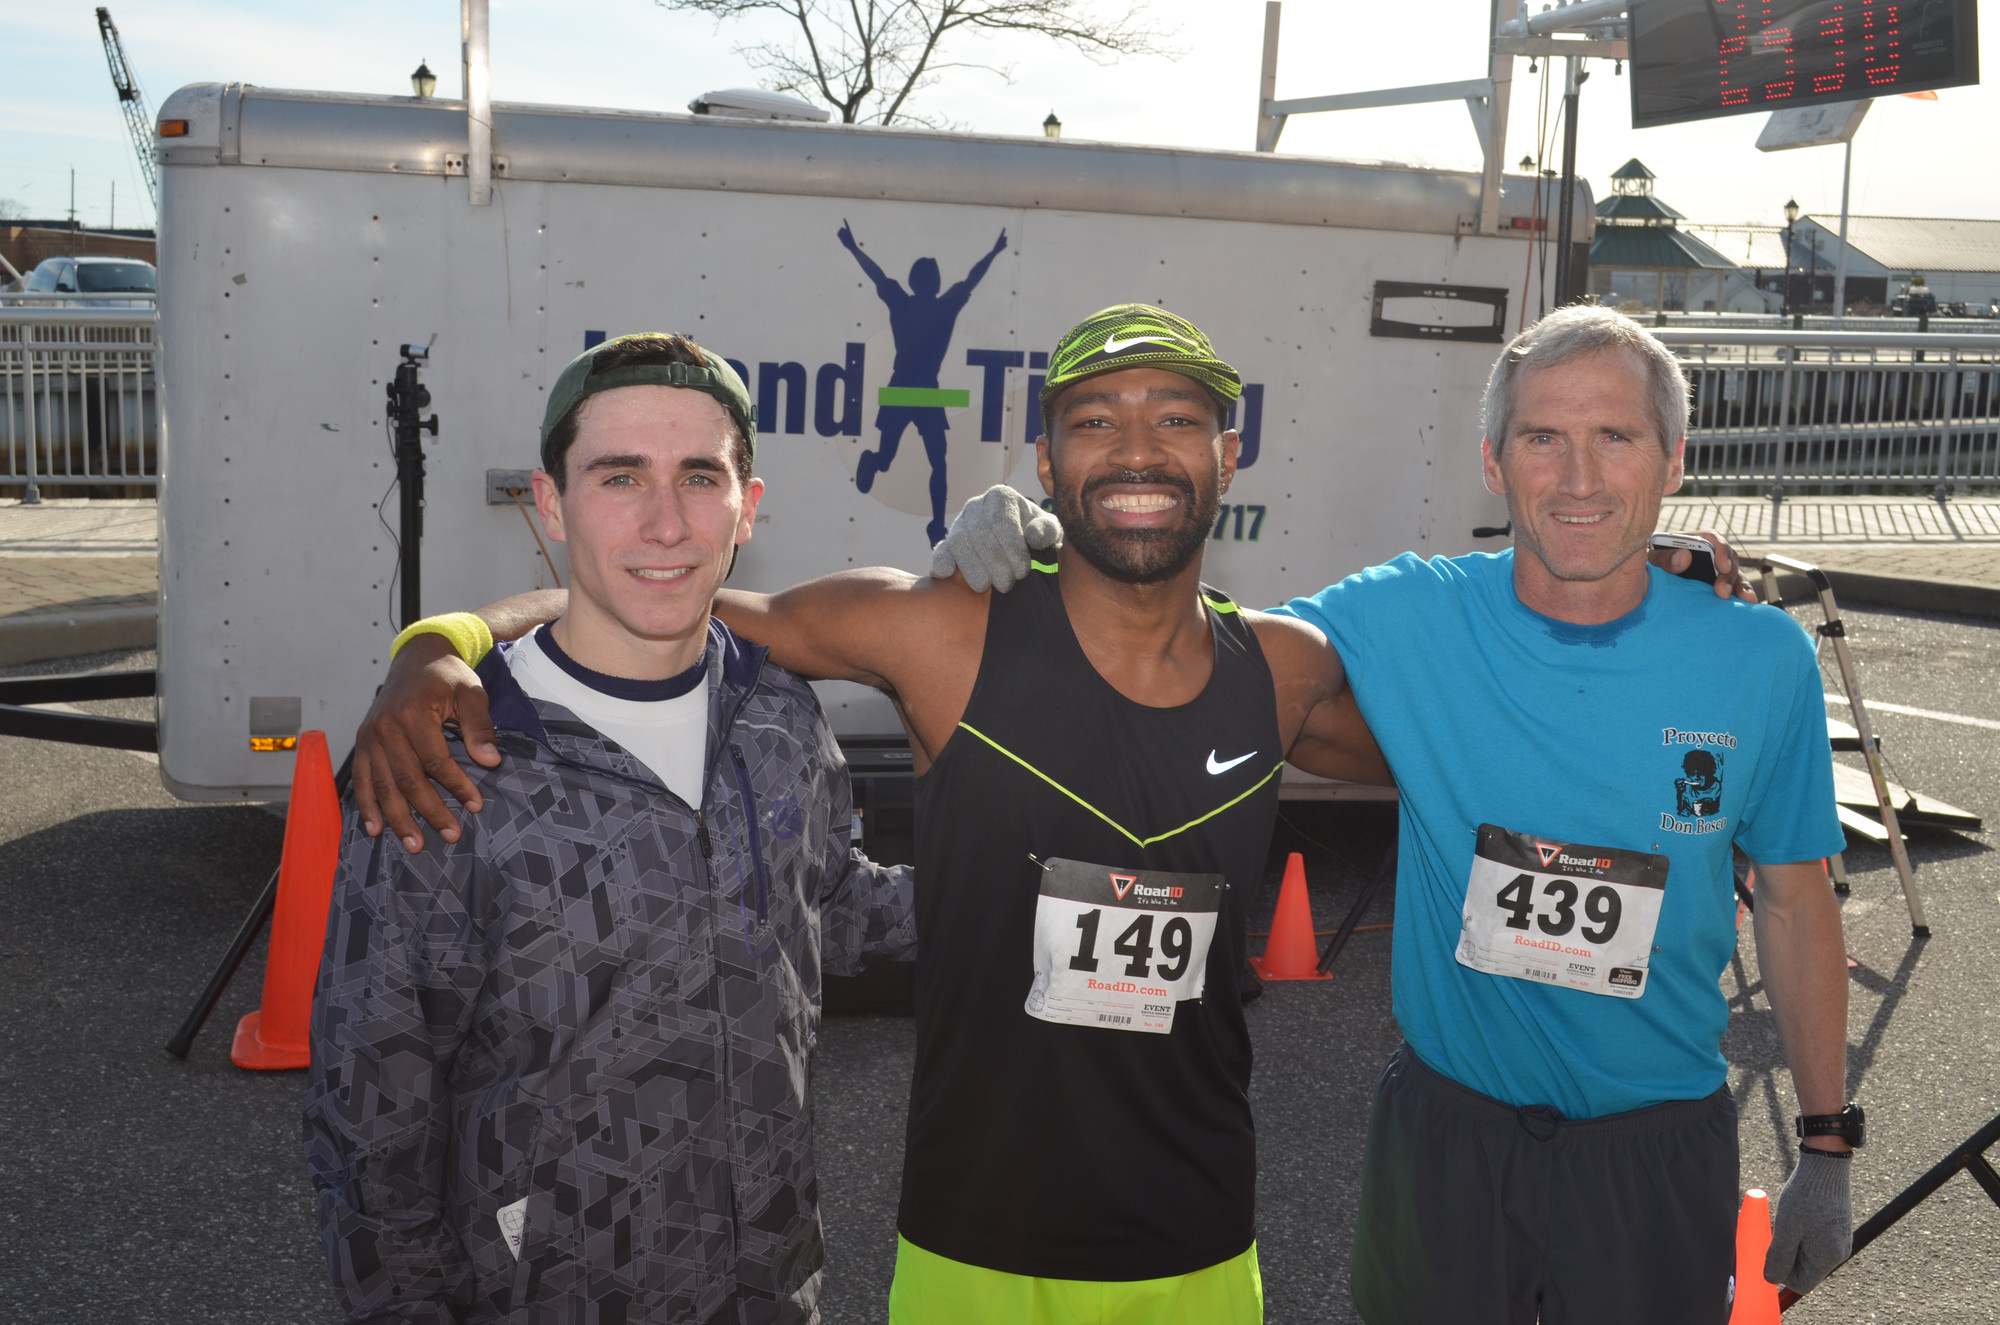 Left to right 1st place overall Justin Sommer, 2nd place overall Ronald Joseph and 3rd place overall Gerry O'Hara